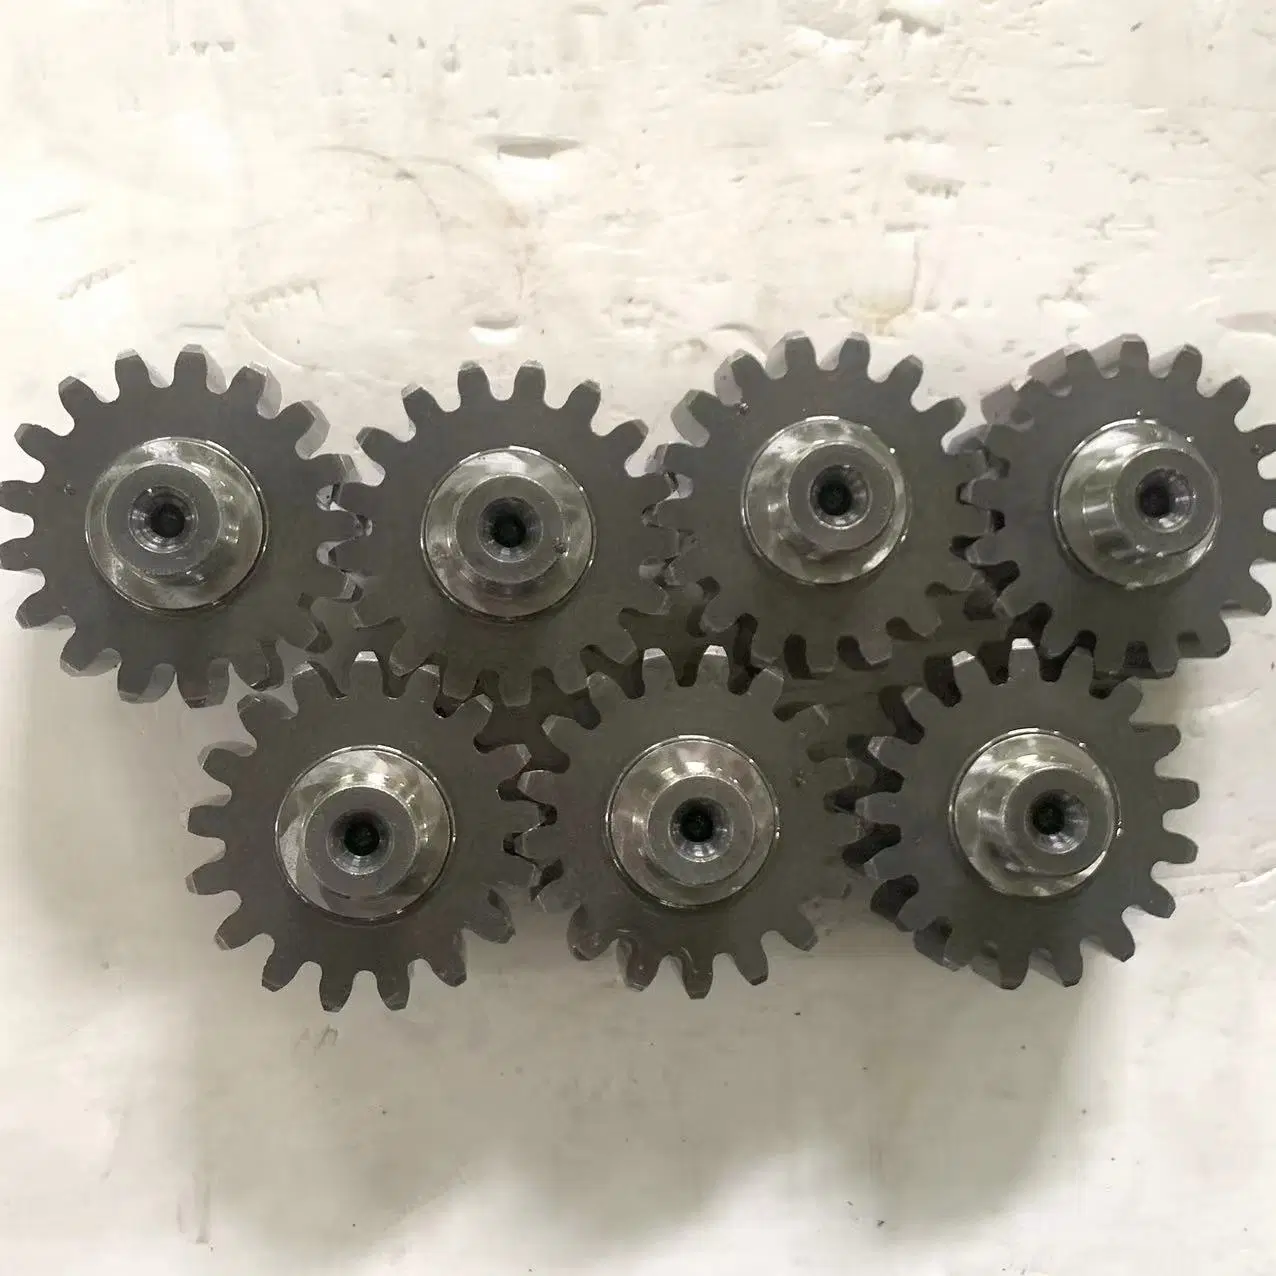 Agricultural Machinery Uses Power Transmission Shafts, Transmission Shafts, Factory Steel Precision Transmission Machinery Parts 087